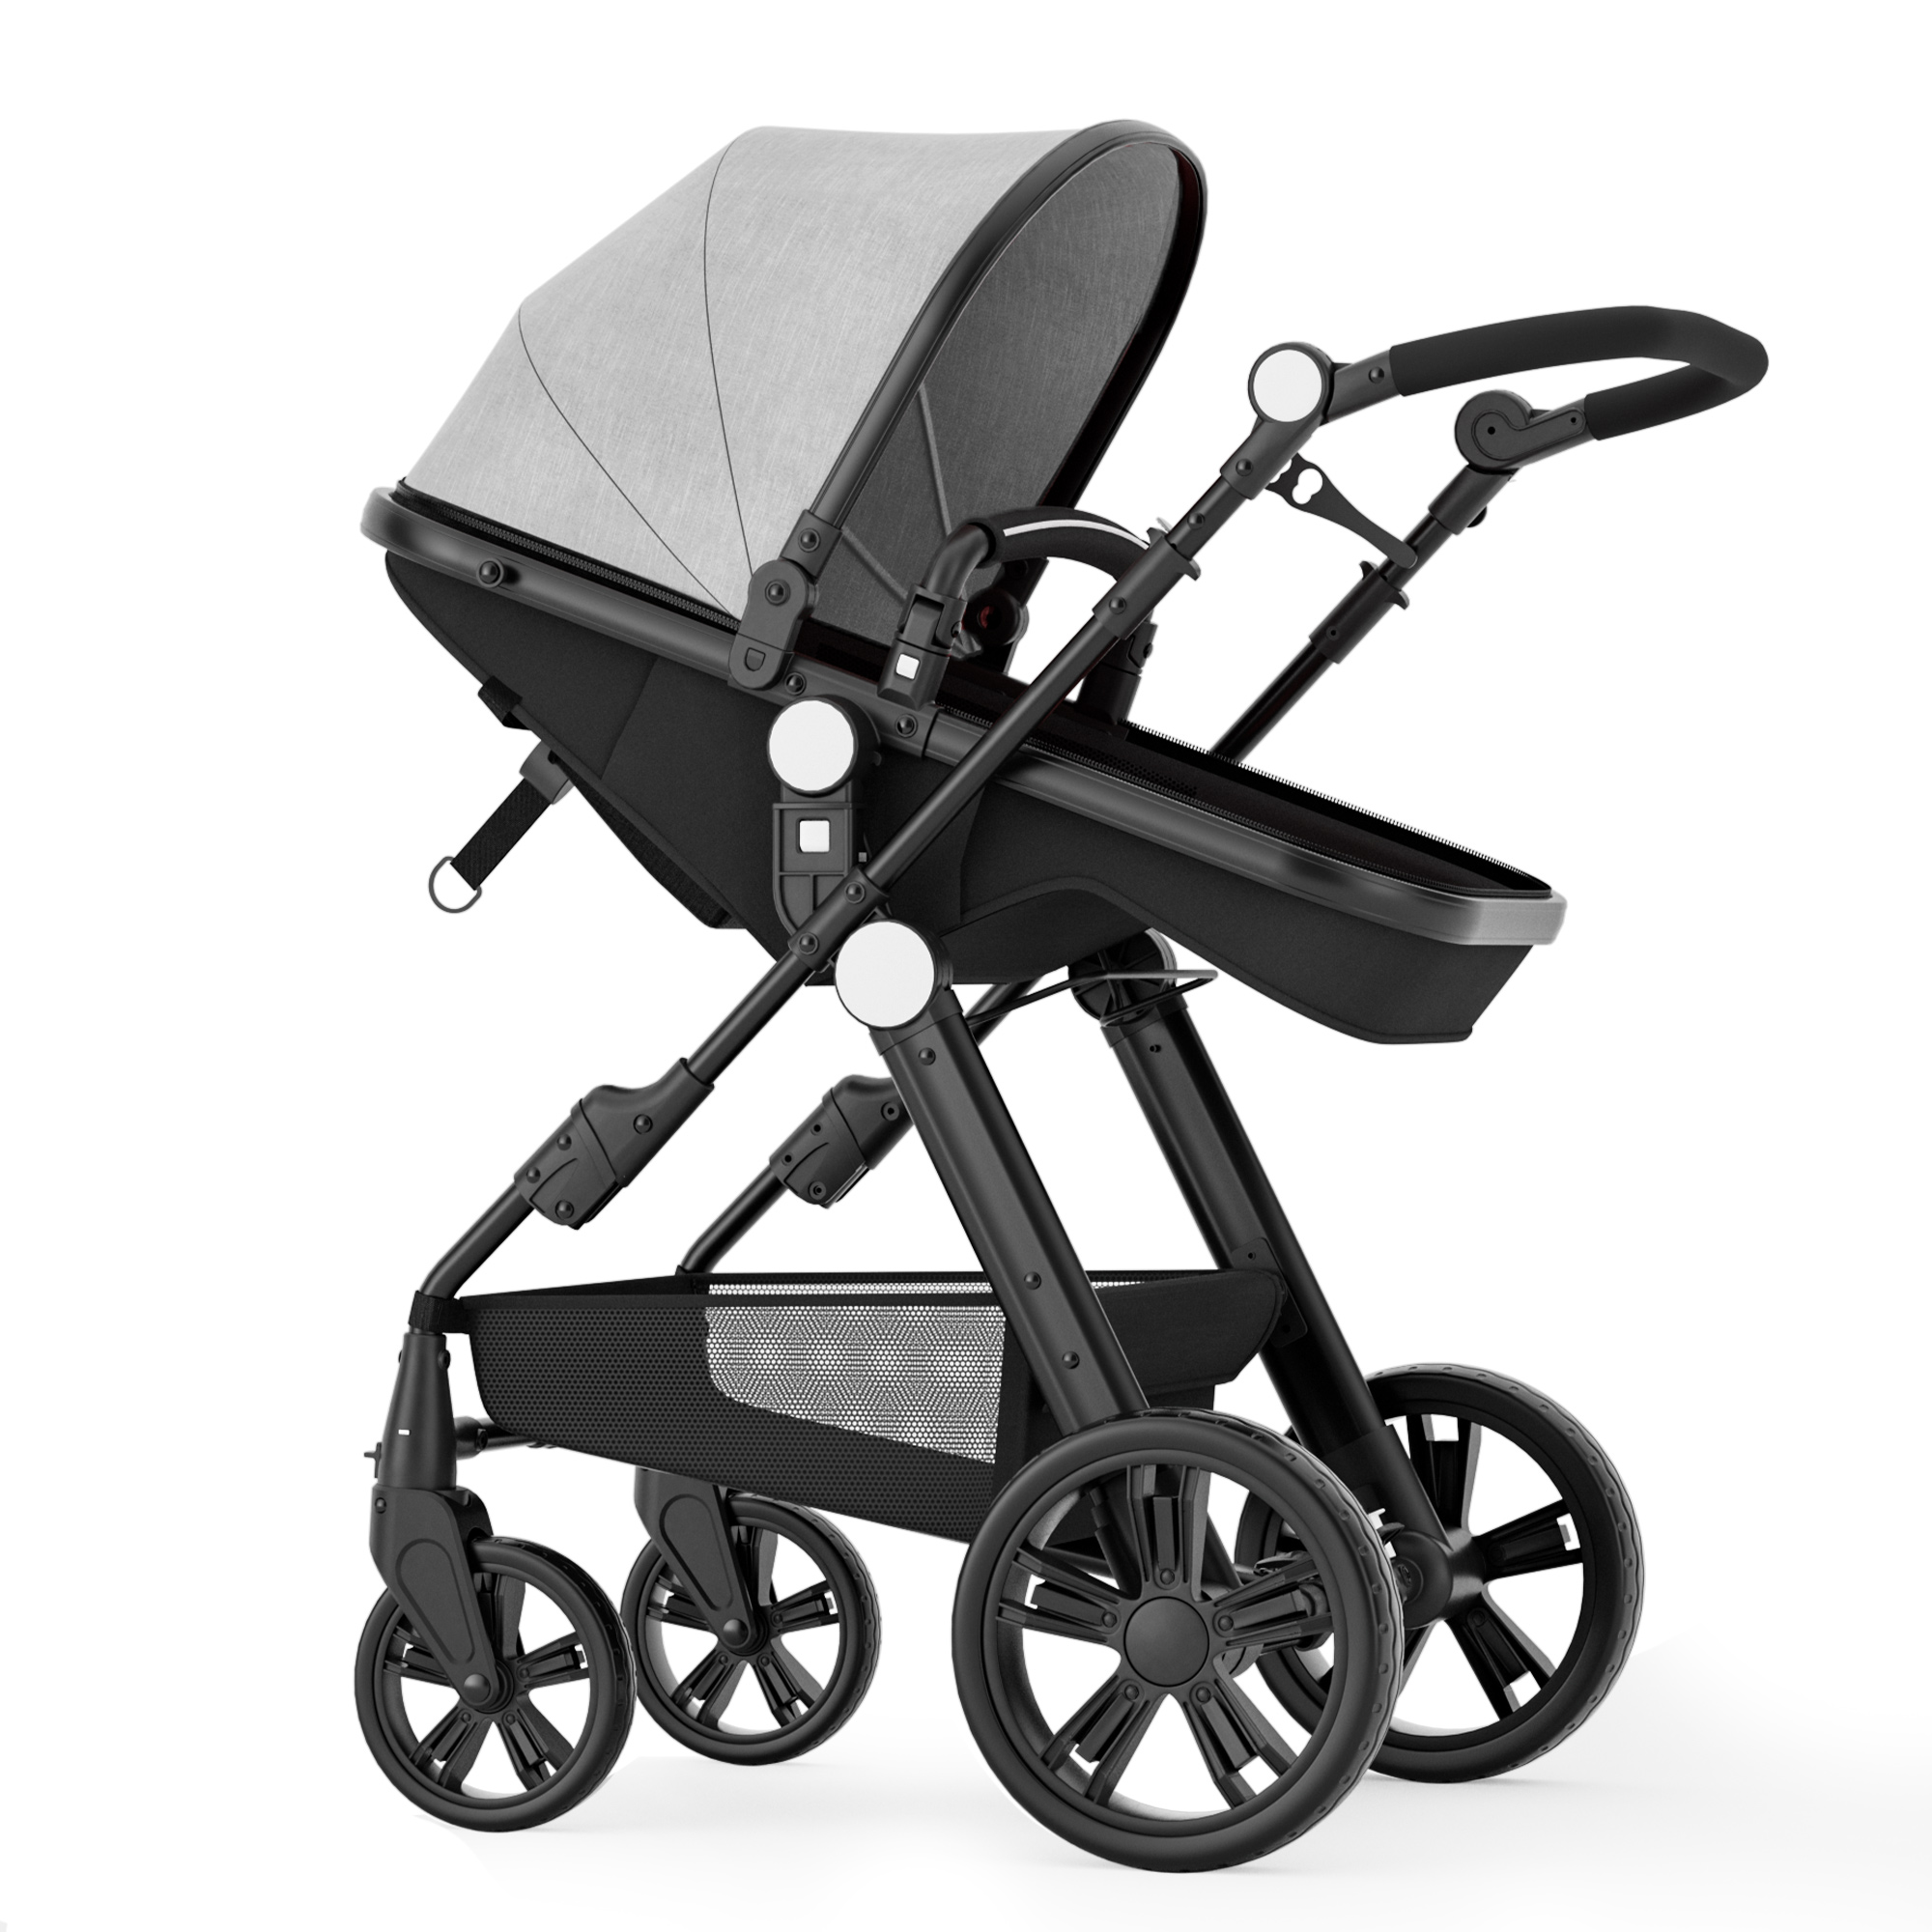 Cynebaby Foldable Baby Newborn Stroller for 0-36 Months Old Babies, Gray - image 1 of 10